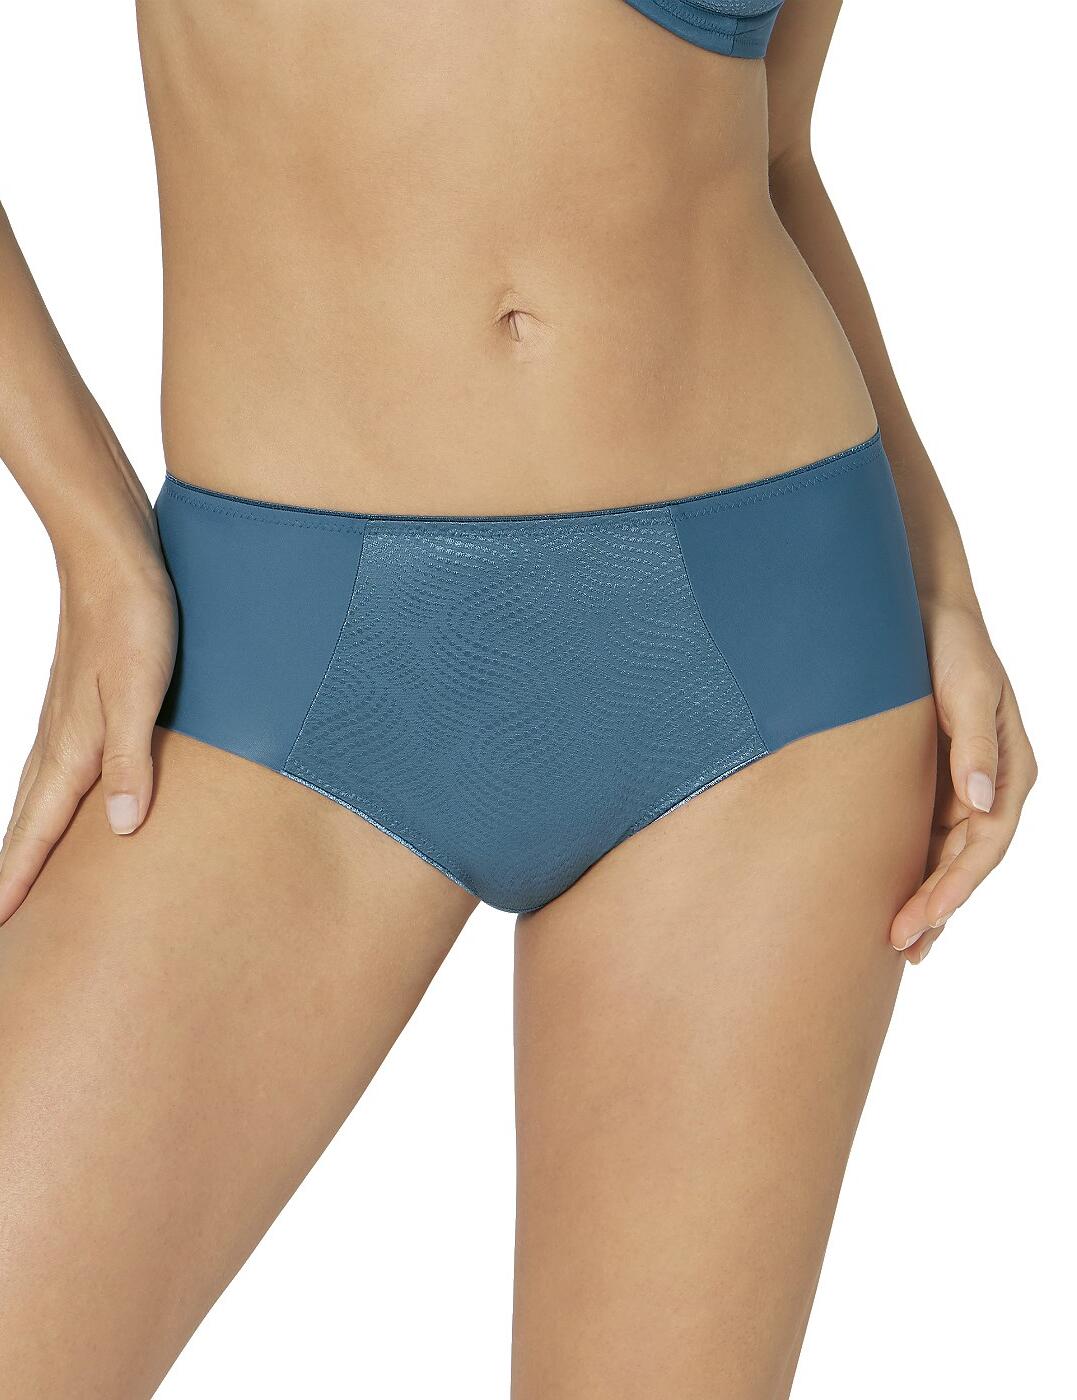 Buy Triumph Essential Minimizer Hipster from £9.00 (Today) – Best